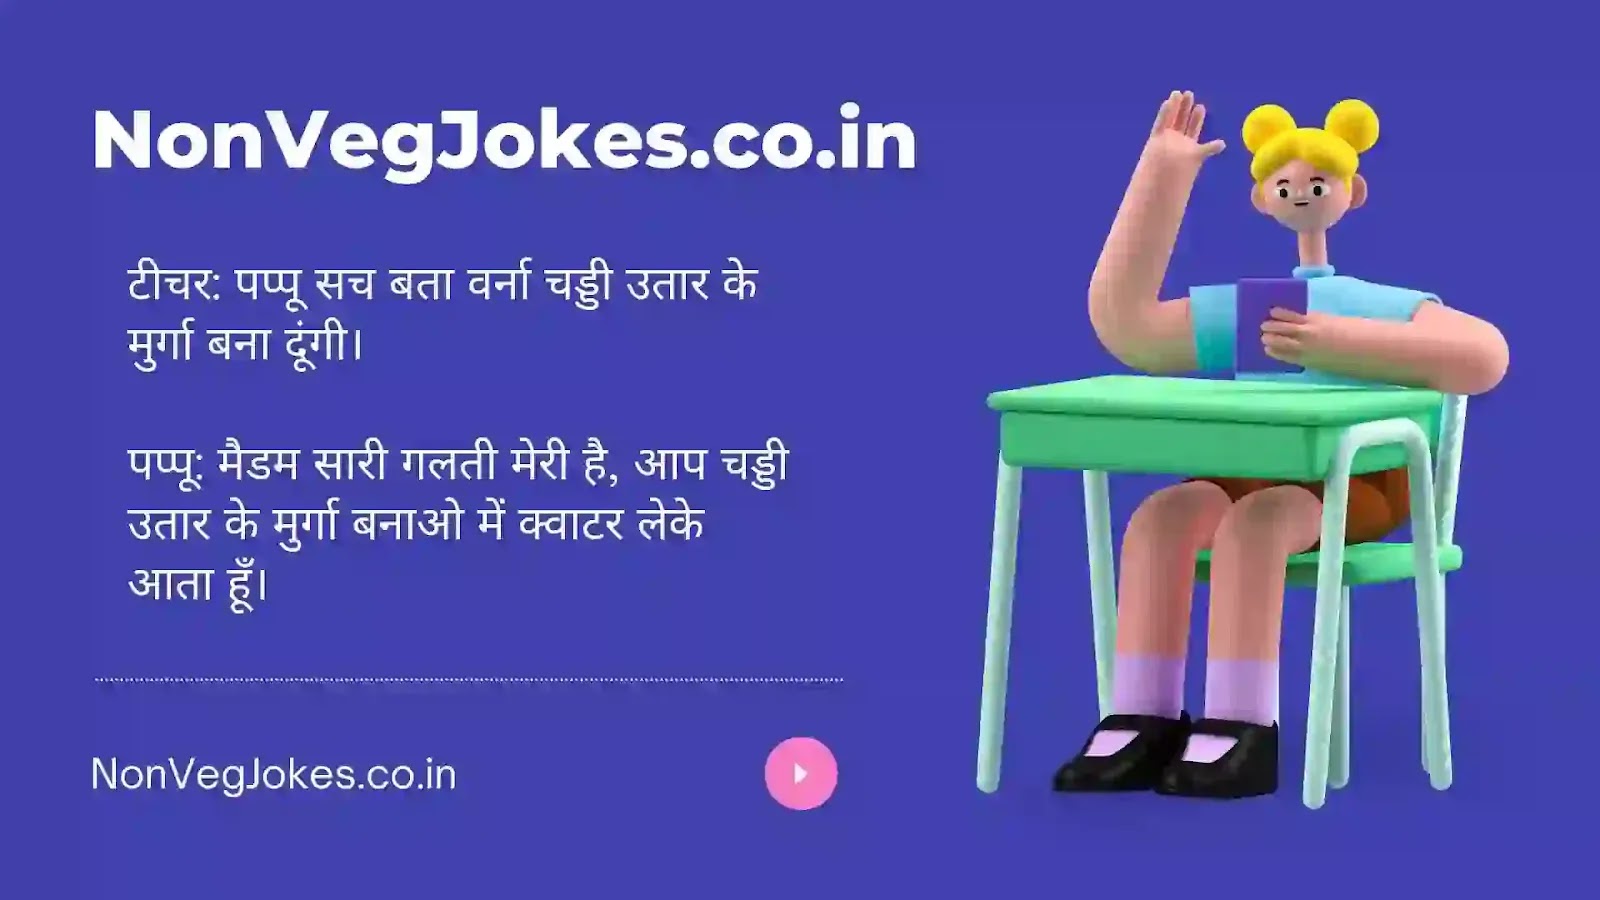 69 Awesome Pure Non Veg Jokes in Hindi to Read Now.